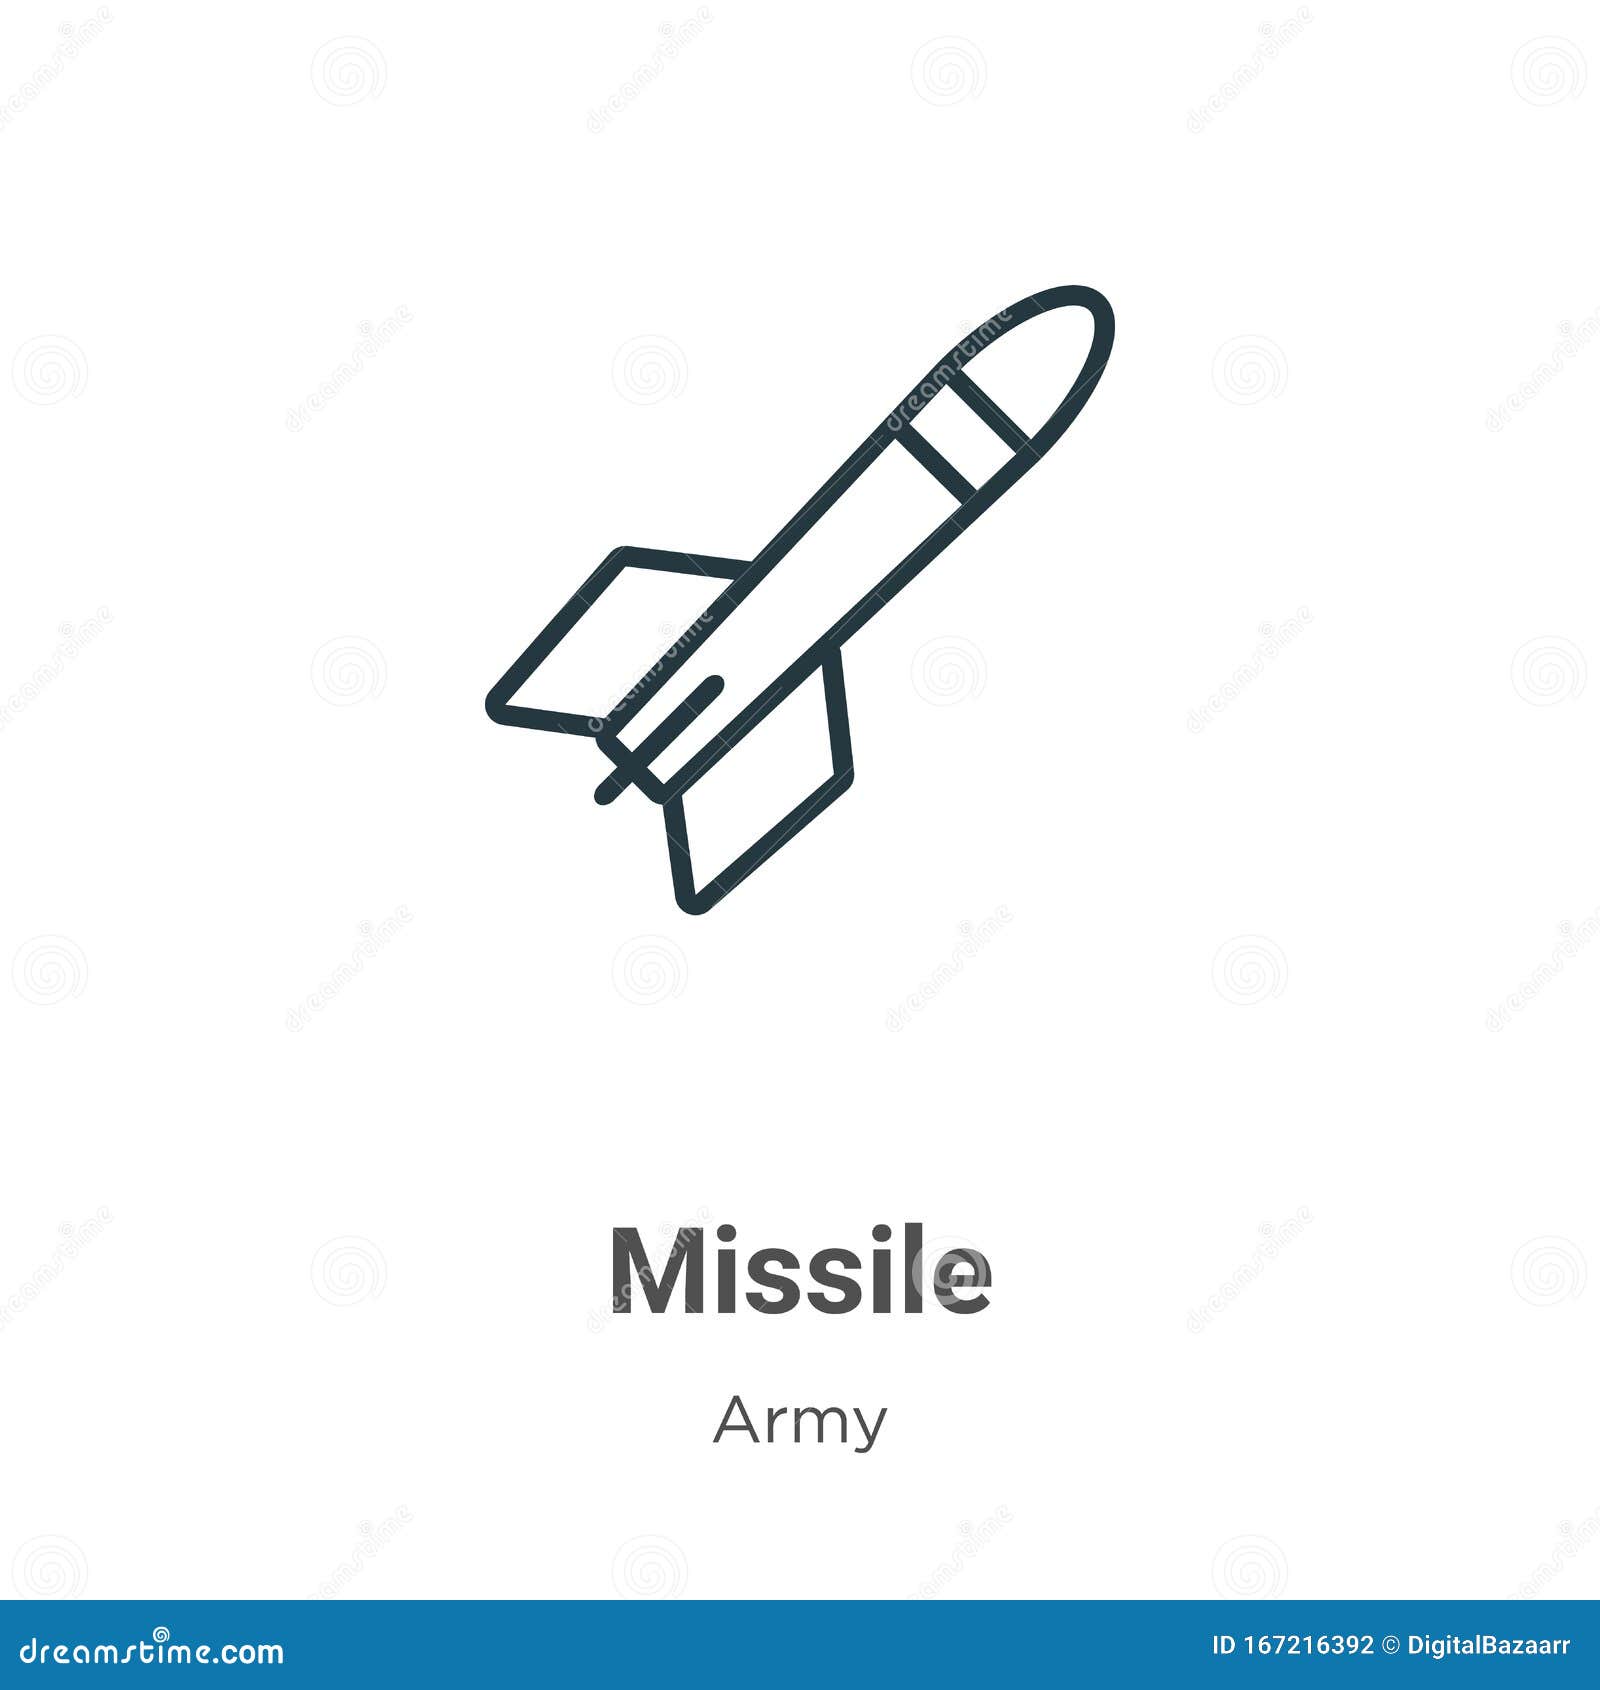 missile outline  icon. thin line black missile icon, flat  simple   from editable army concept